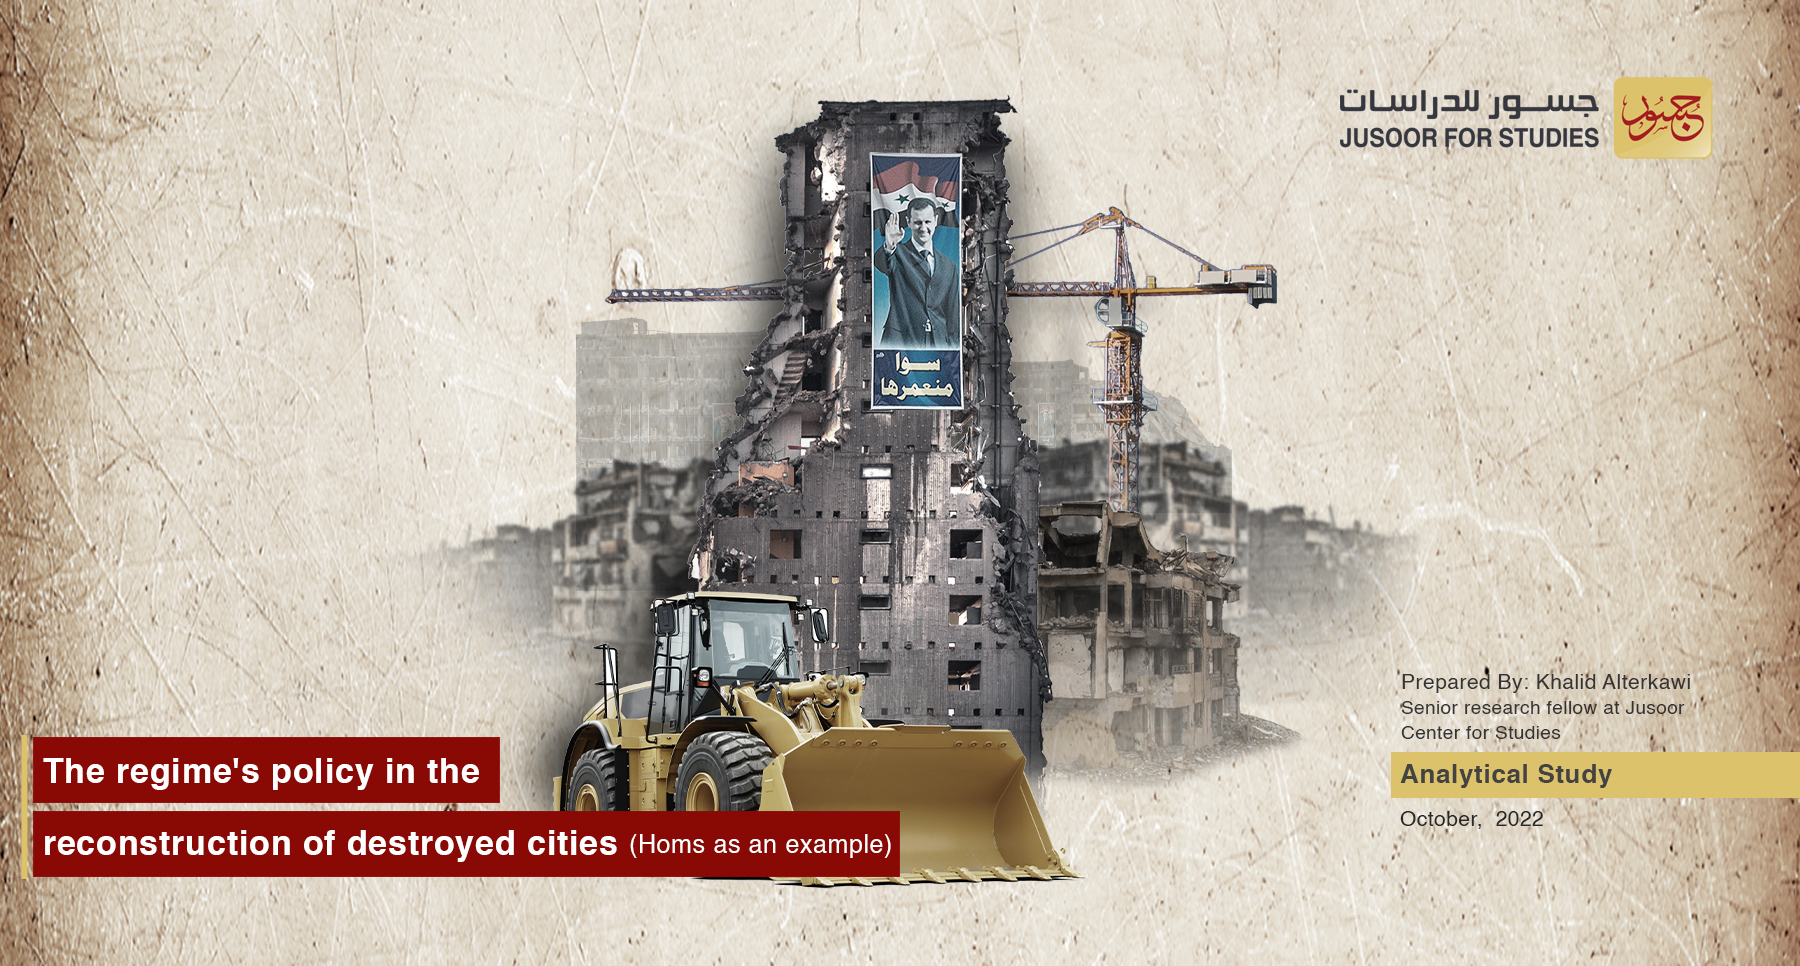 The regime's policy in the reconstruction of destroyed cities (Homs as an example)